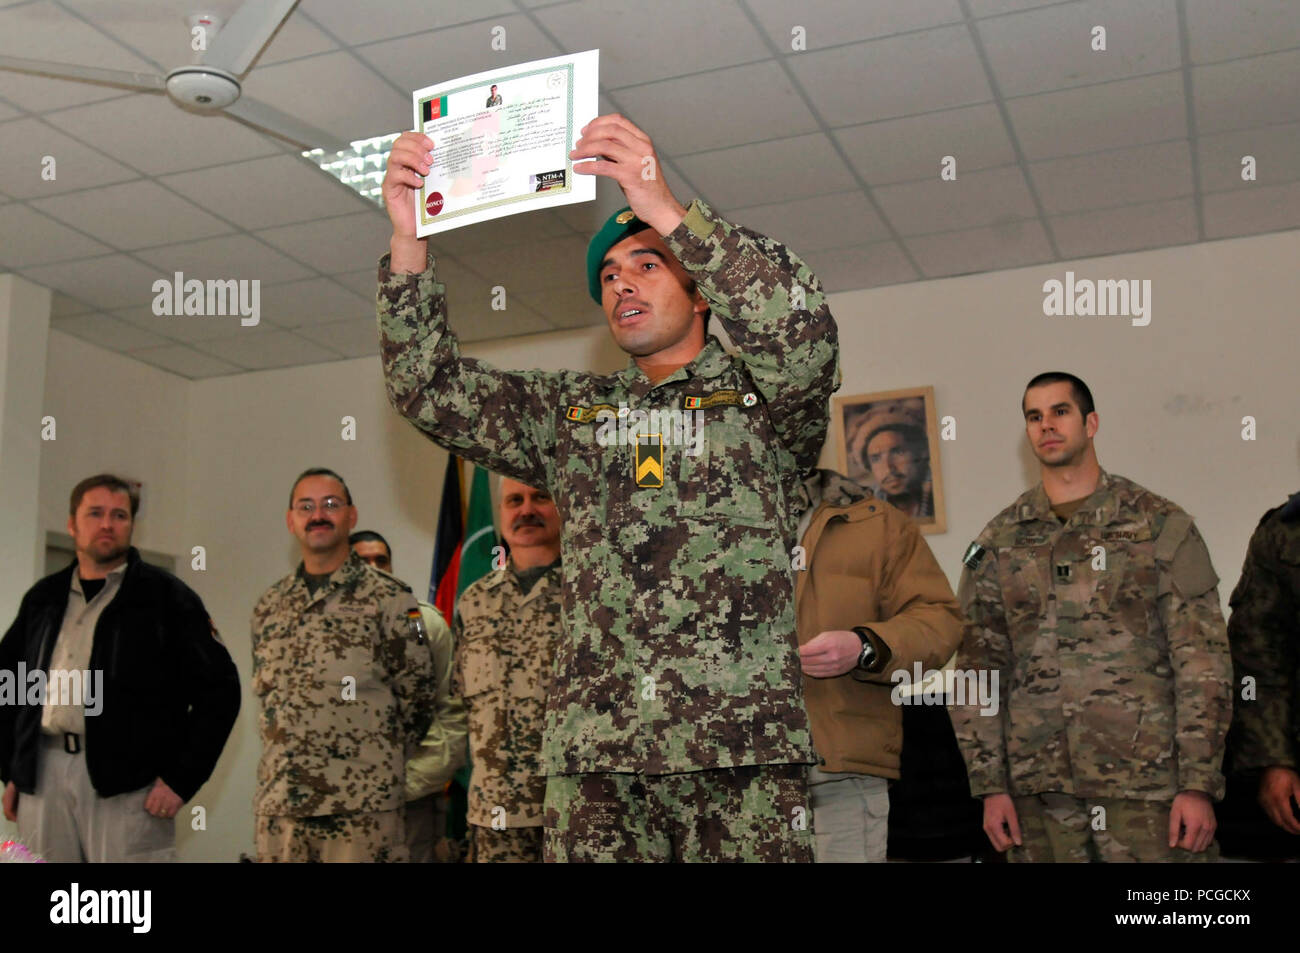 An Afghan National Army soldier proudly displays his certificate during a graduation ceremony held at the Afghan National Army Engineer School near Camp Spann, Dec. 15. Fifteen Afghan servicemen graduated in the ceremony and can now wear the Explosive Ordnance Disposal patch and badge after completing 22 weeks of intensive EOD and Improvised Explosive Device Defeat training. The Engineer School is the only one in Afghanistan that teaches the fundamentals of EOD and IEDD to Afghan National Security Forces. International Security Assistance Force Regional Command North supports Afghan National S Stock Photo